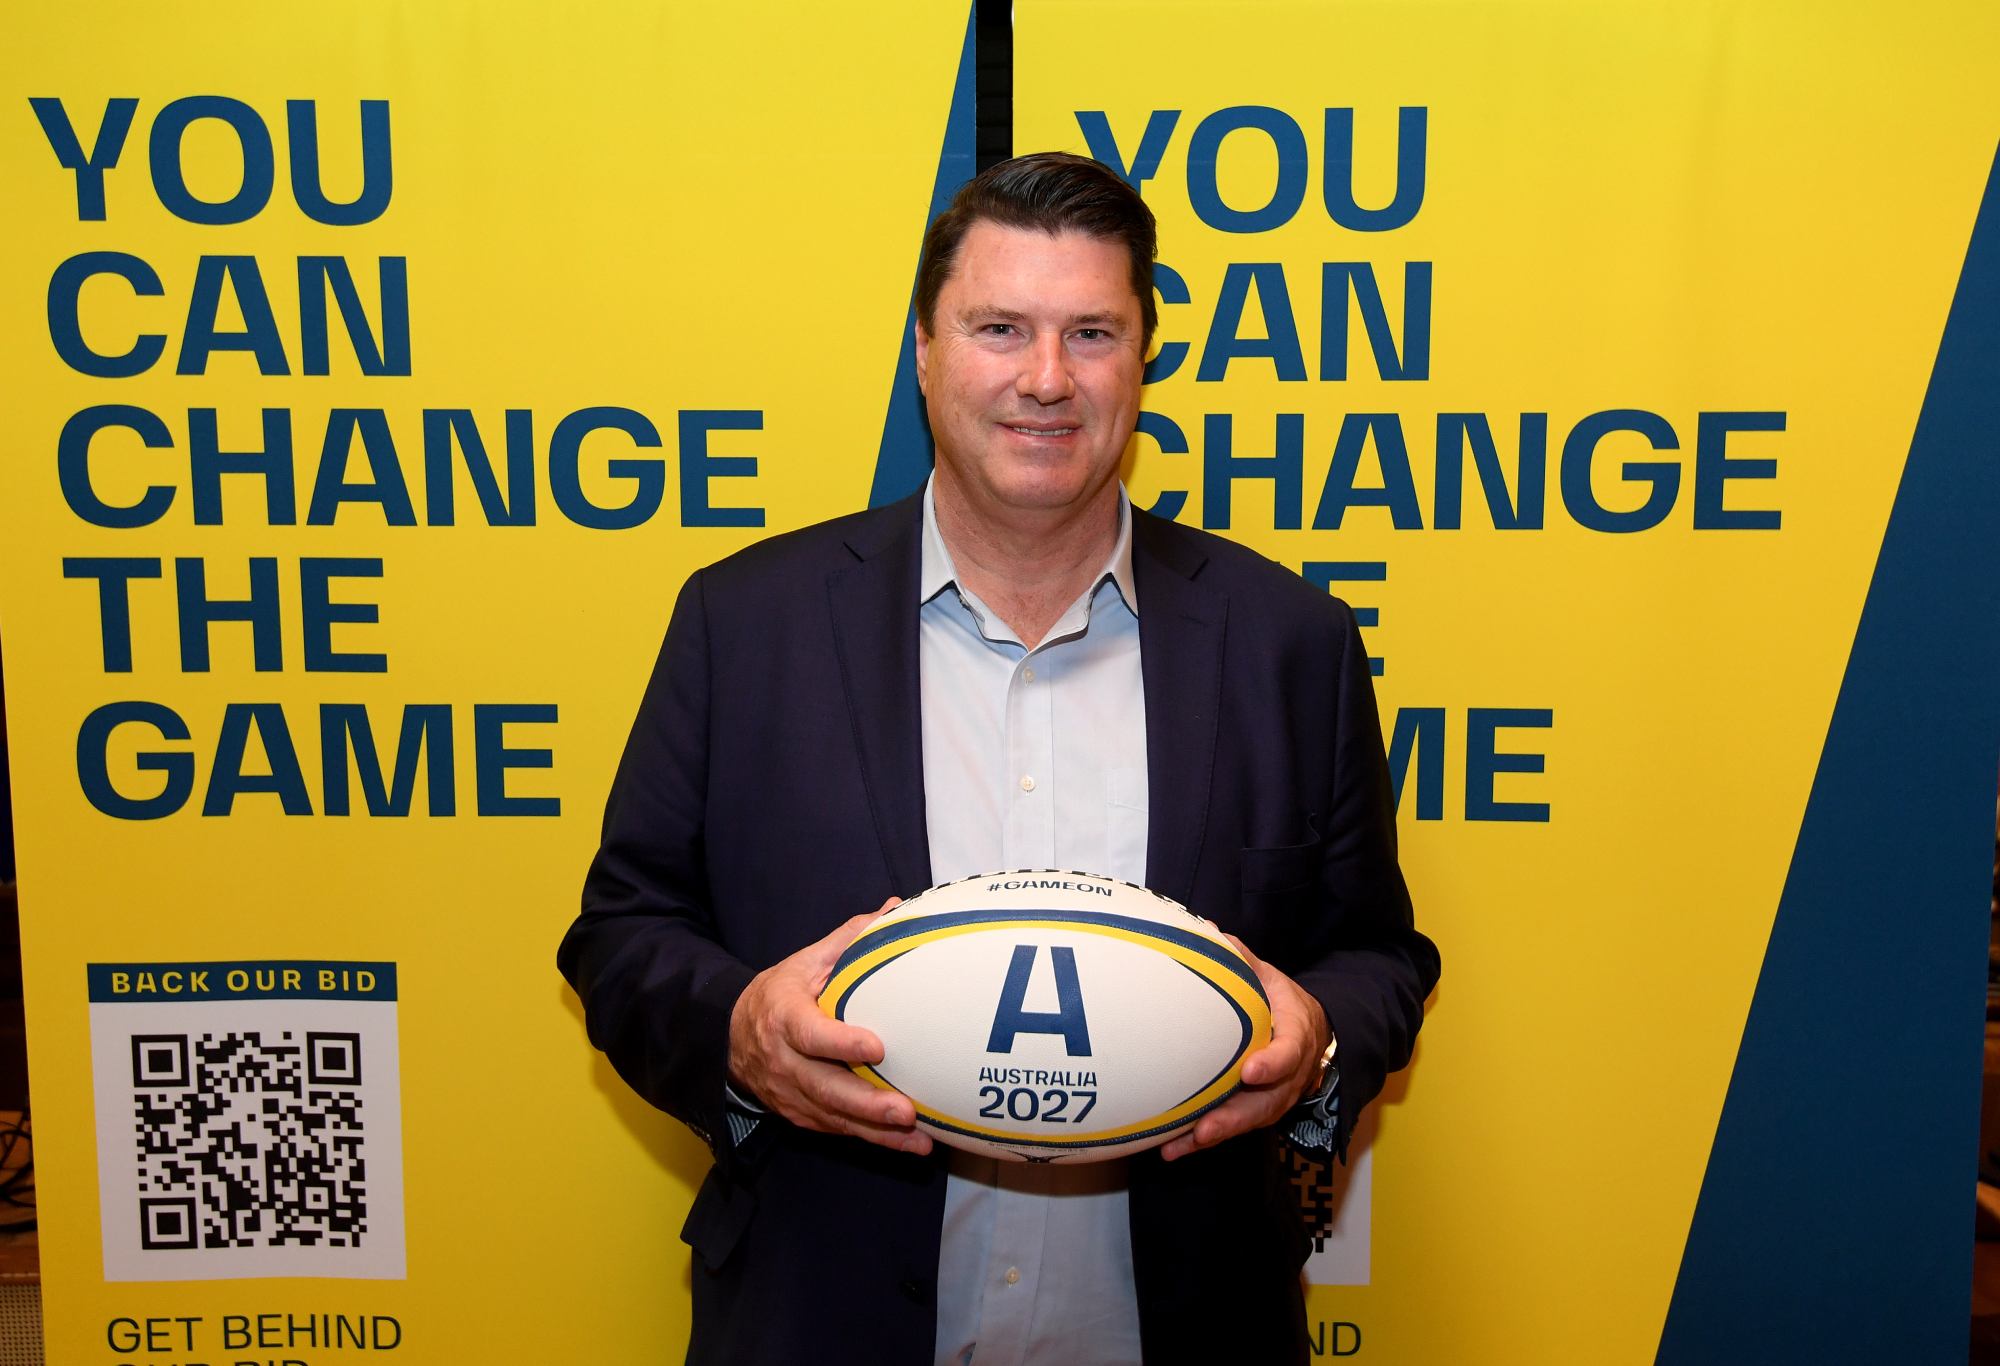 LONDON, ENGLAND - NOVEMBER 10: Hamish McLennan, Rugby Australia Chairman, poses during the Australia 2027 Rugby World Cup Bid UK Media Briefing at Granger & Co on November 10, 2021 in London, England. (Photo by Tom Dulat/Getty Images for Rugby Australia)